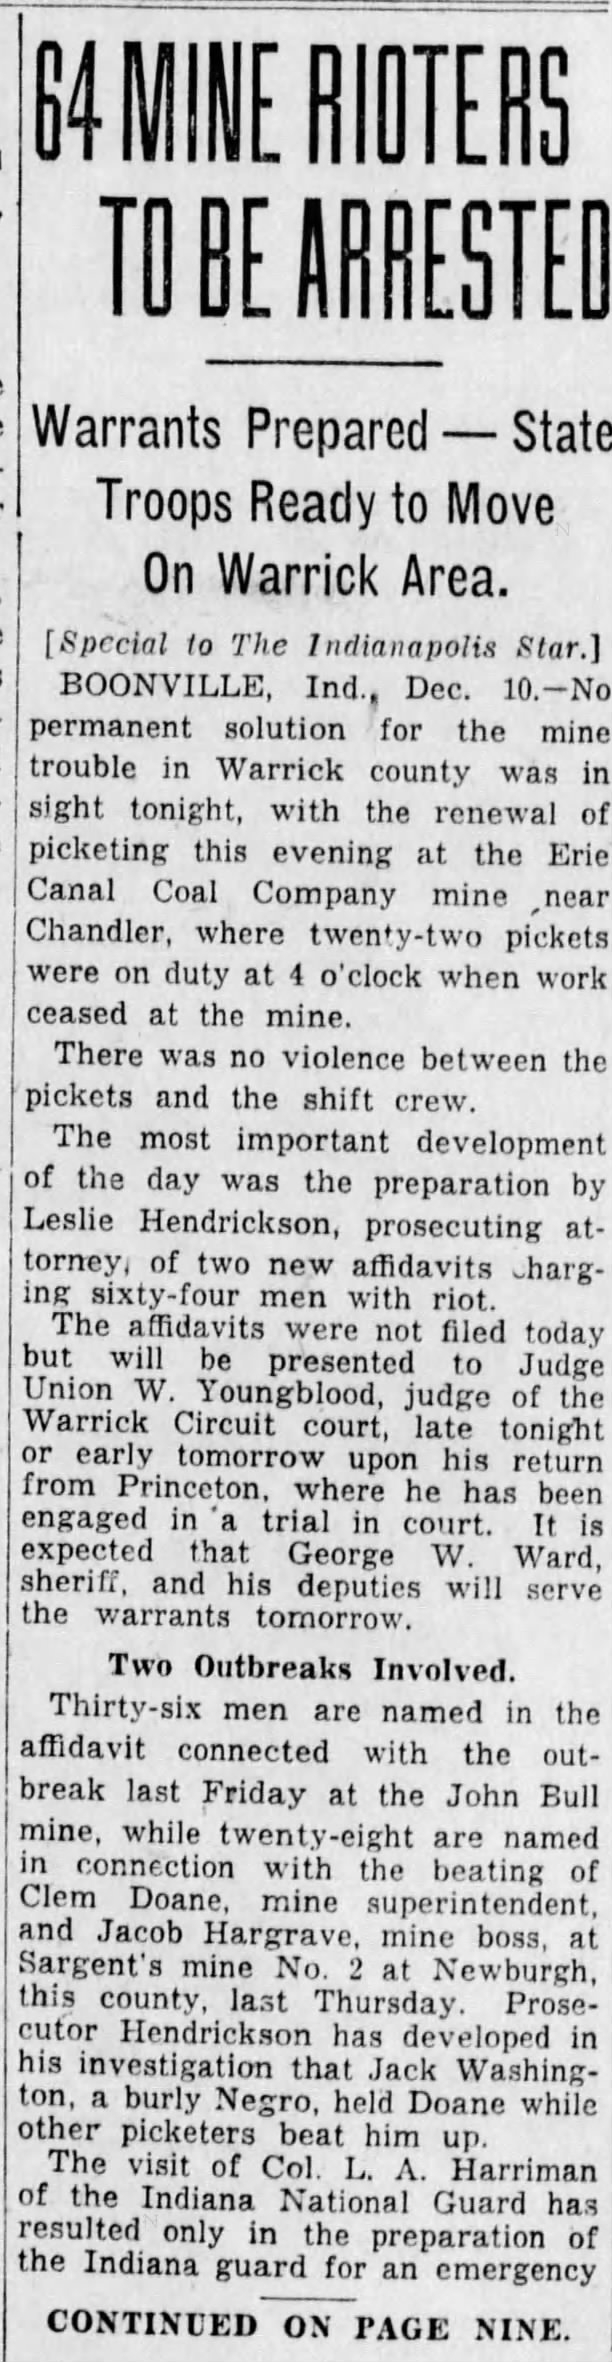 The Indianapolis Star (Indianapolis, Indiana) 11 Dec 1929, Wed Page1